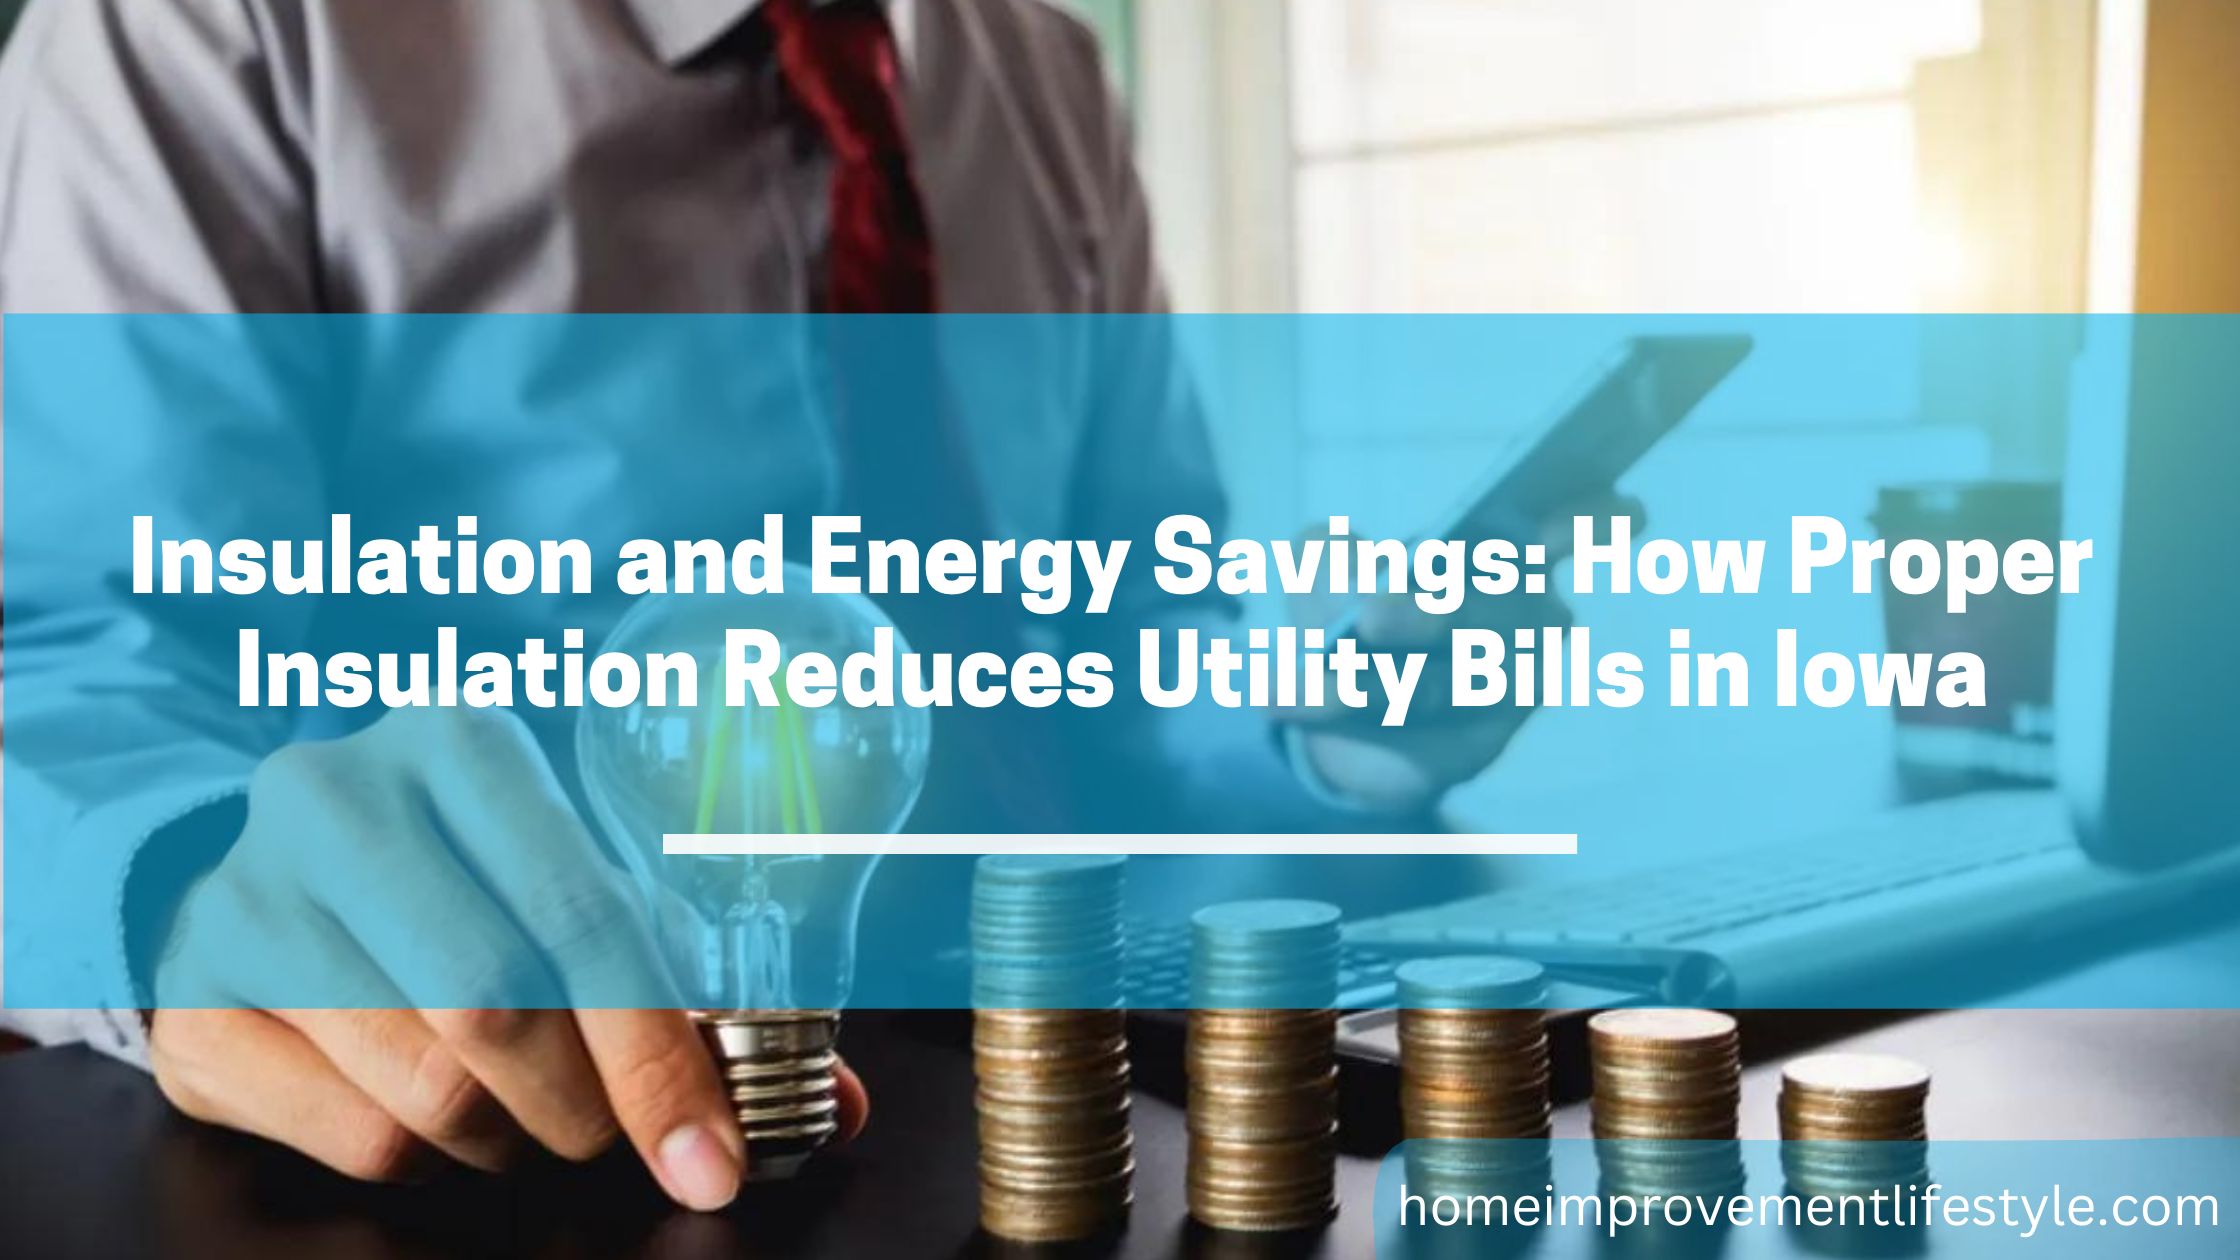 Insulation and Energy Savings: How Proper Insulation Reduces Utility Bills in Iowa